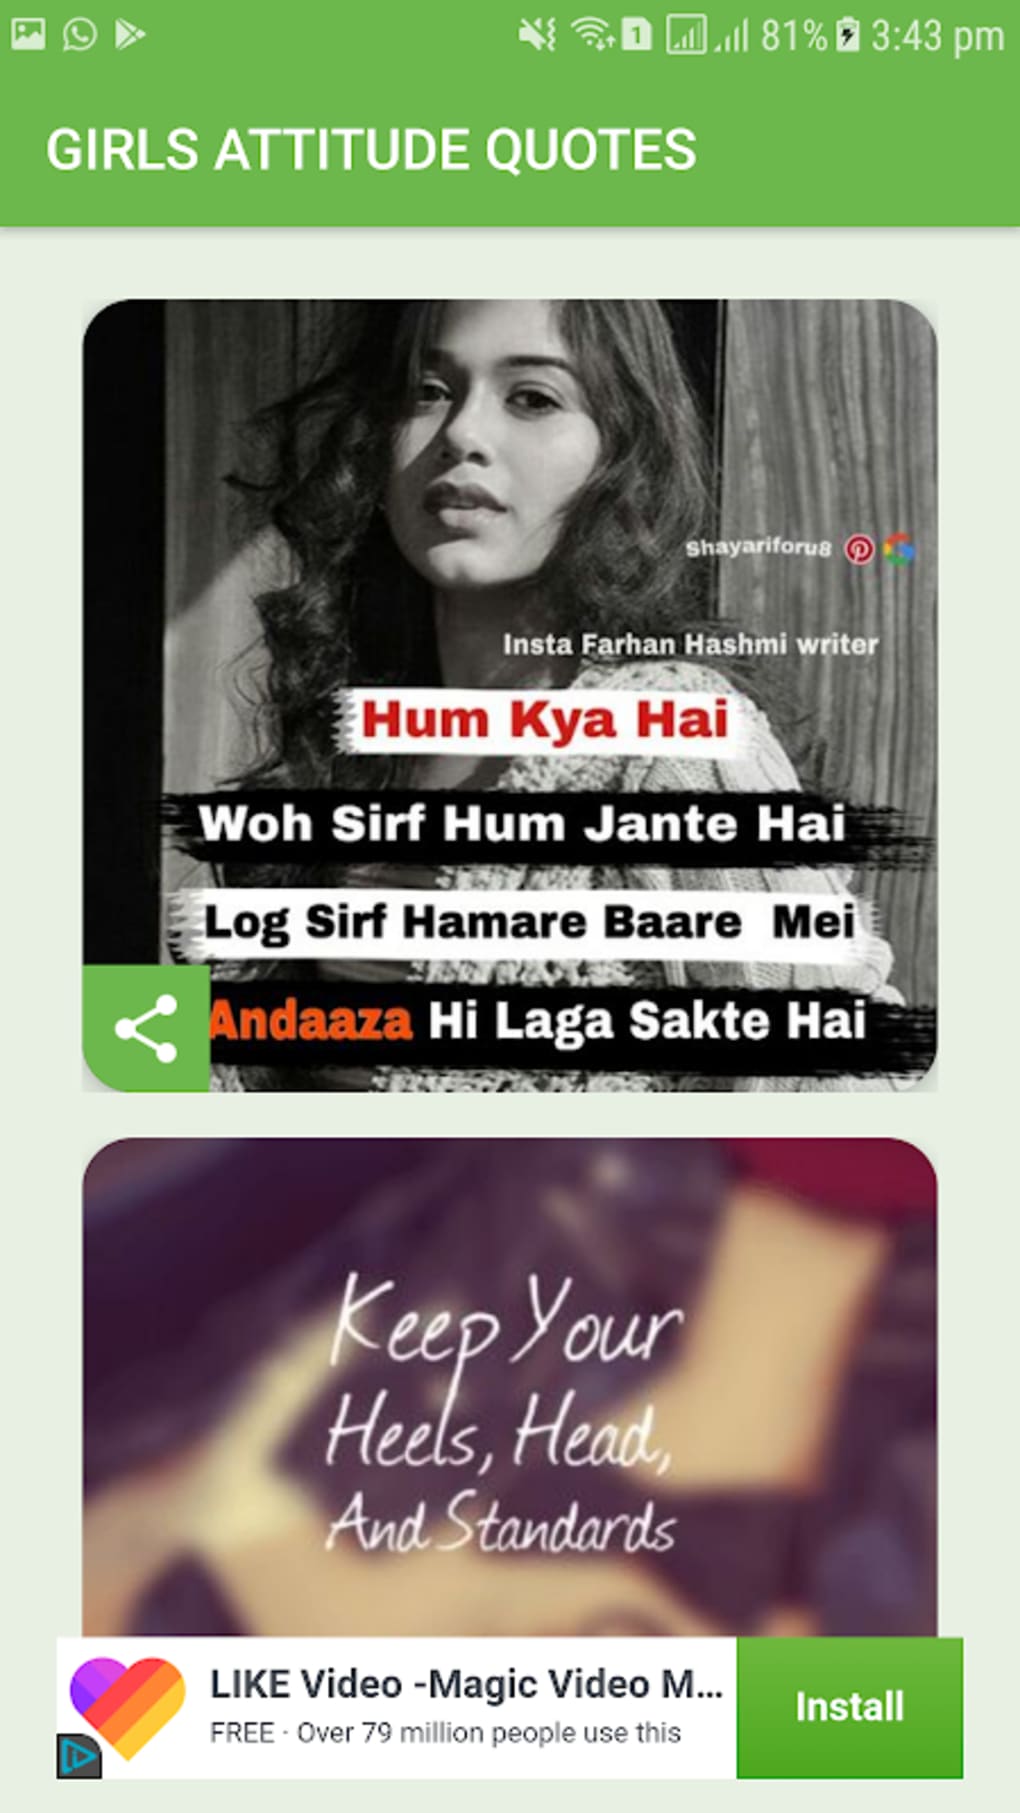 Girl attitude quotes with pictures APK para Android - Download